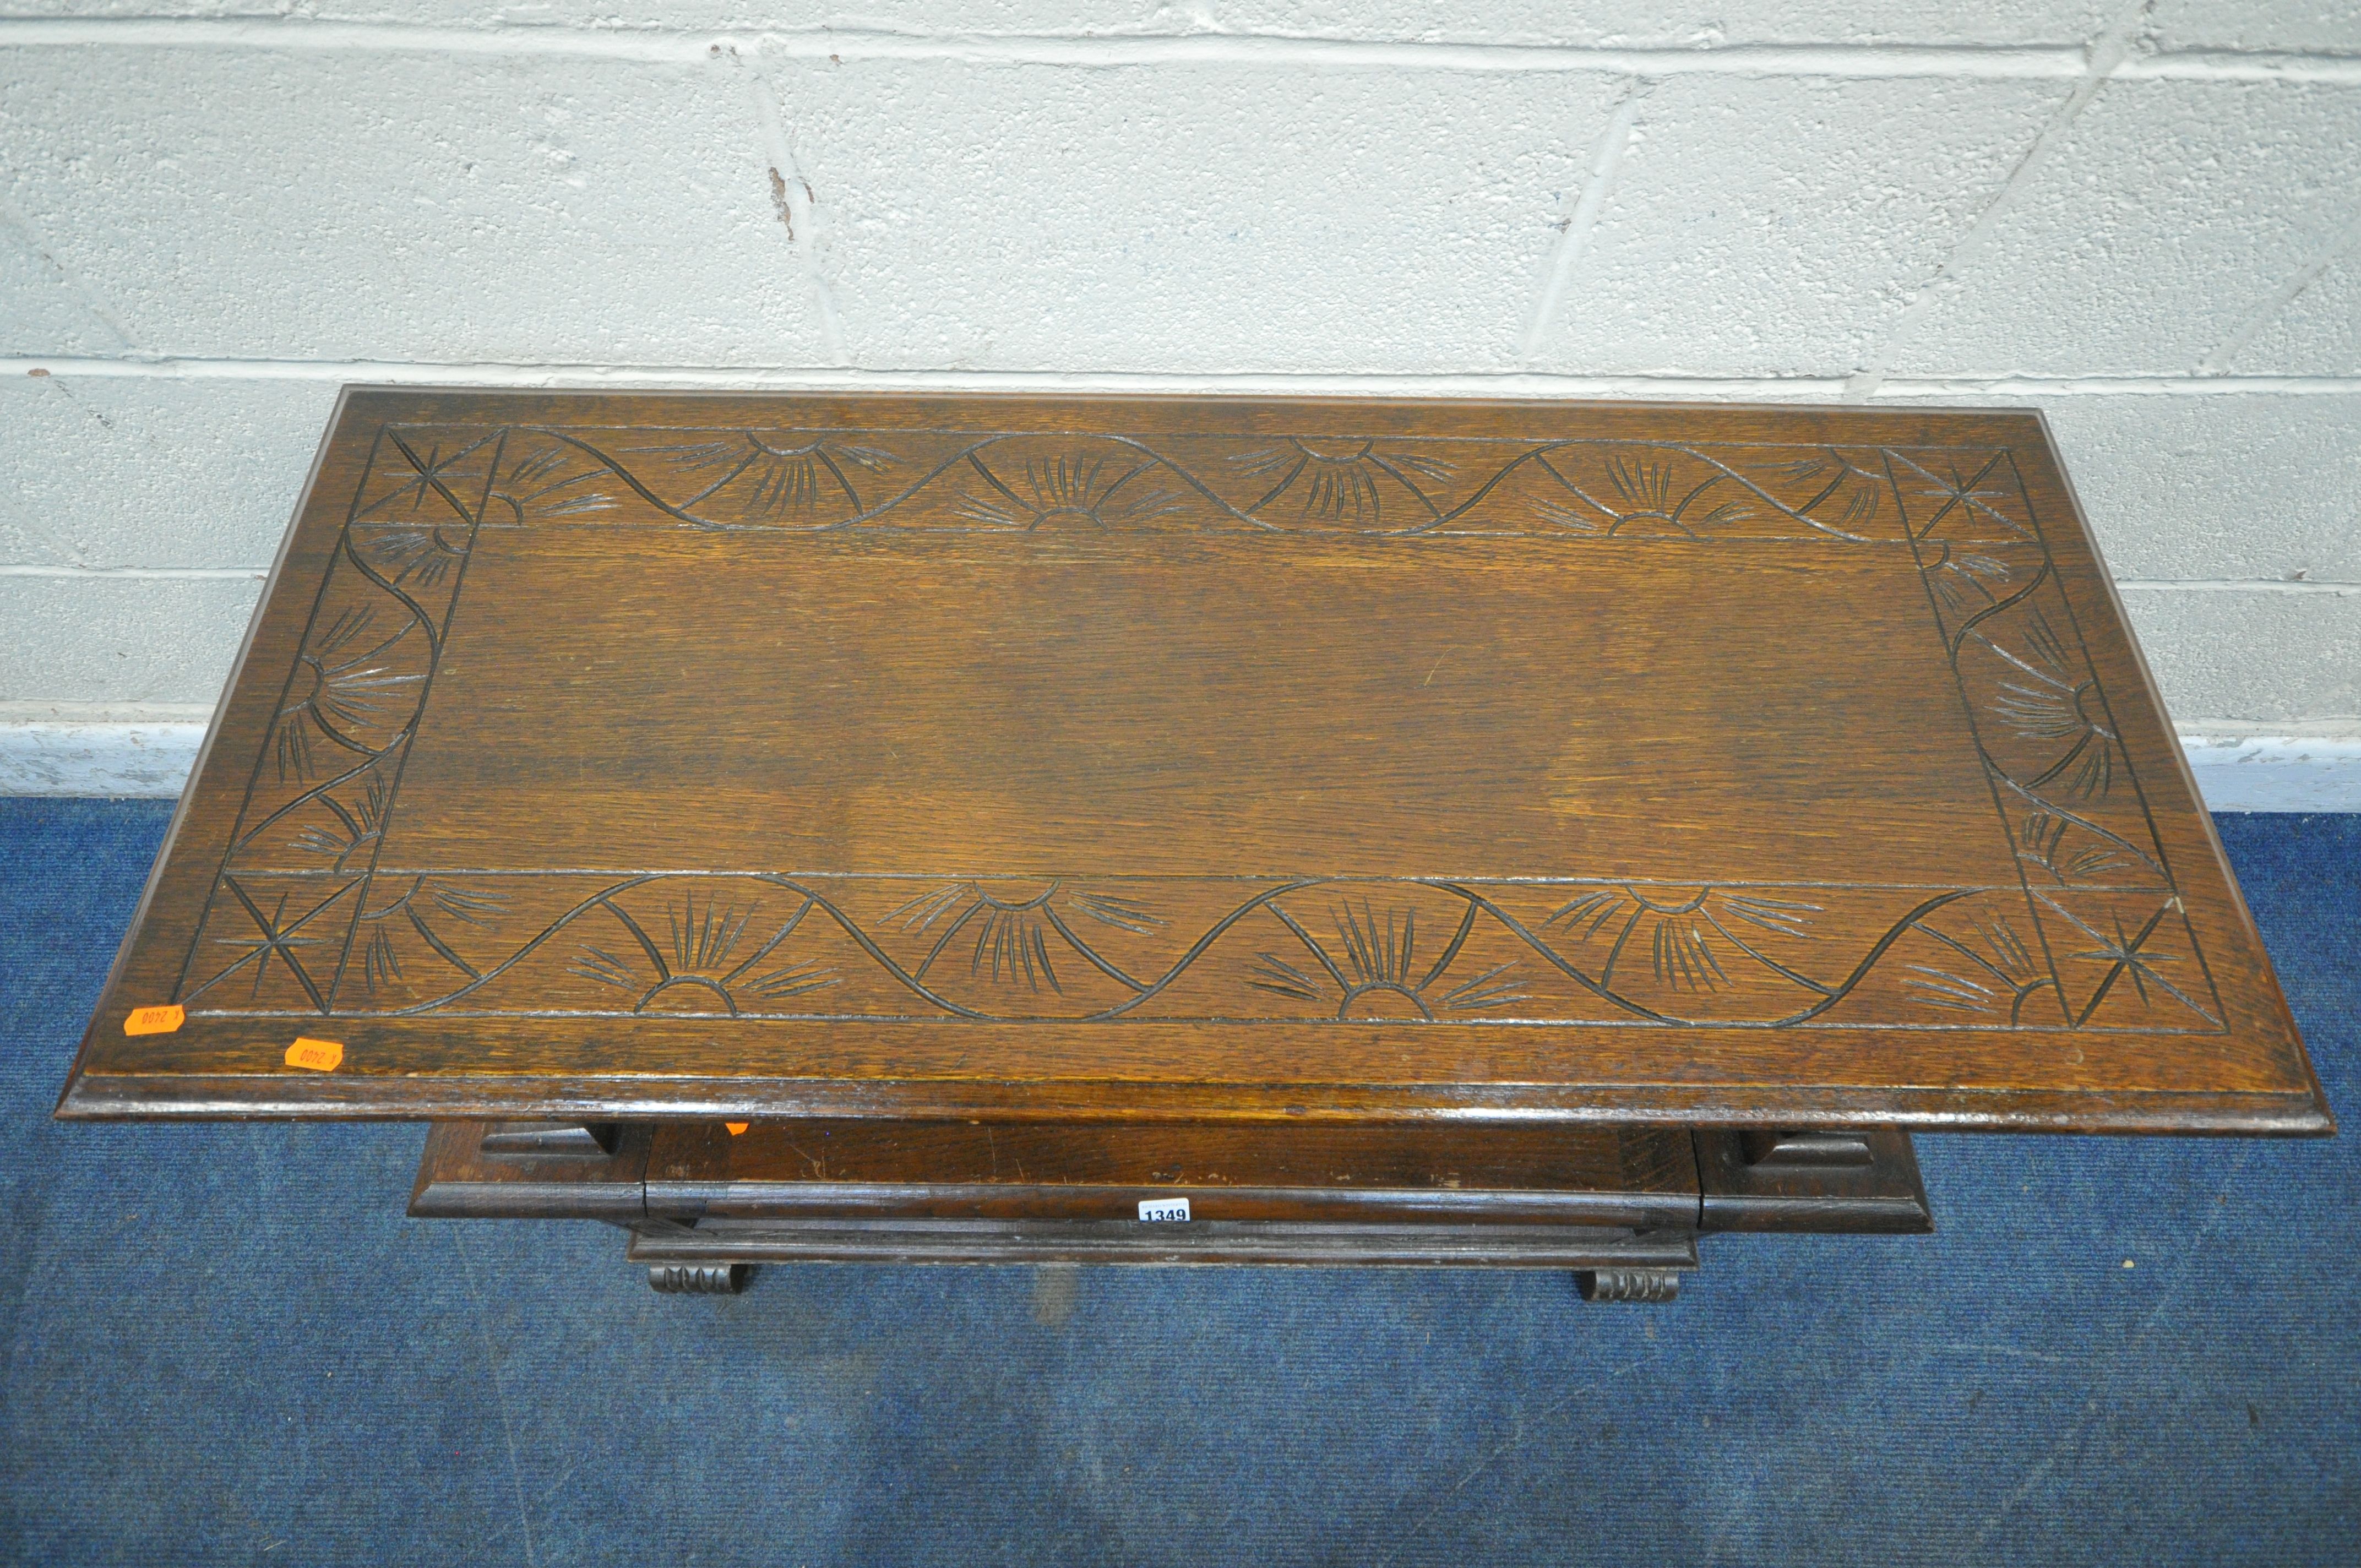 AN EARLY 20TH CENTURY OAK MONKS BENCH, with a rise and fall backrest / surface, lion armrests and - Image 2 of 4